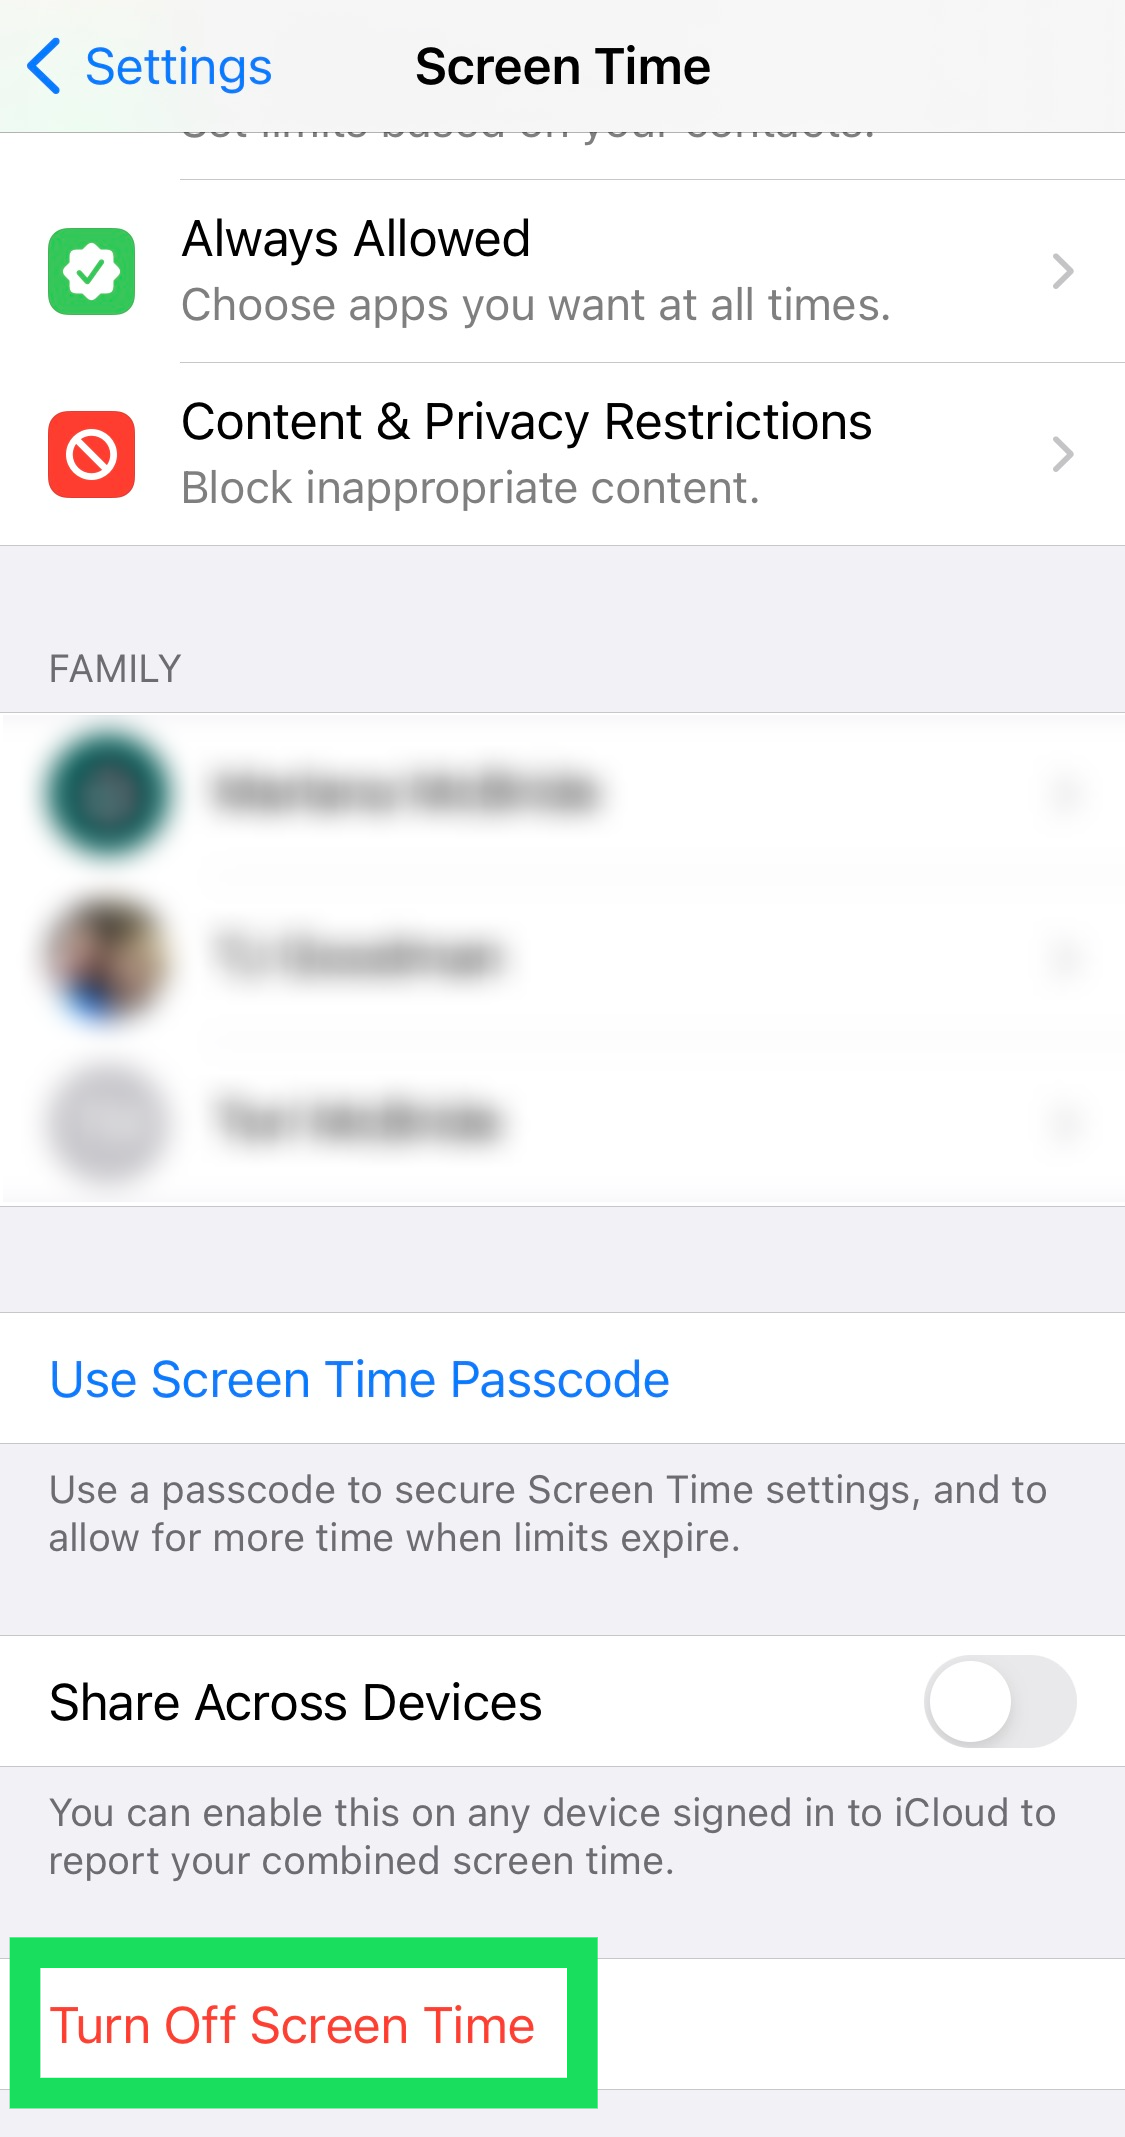 How to Turn Off Screen Time on the iPhone or iPad